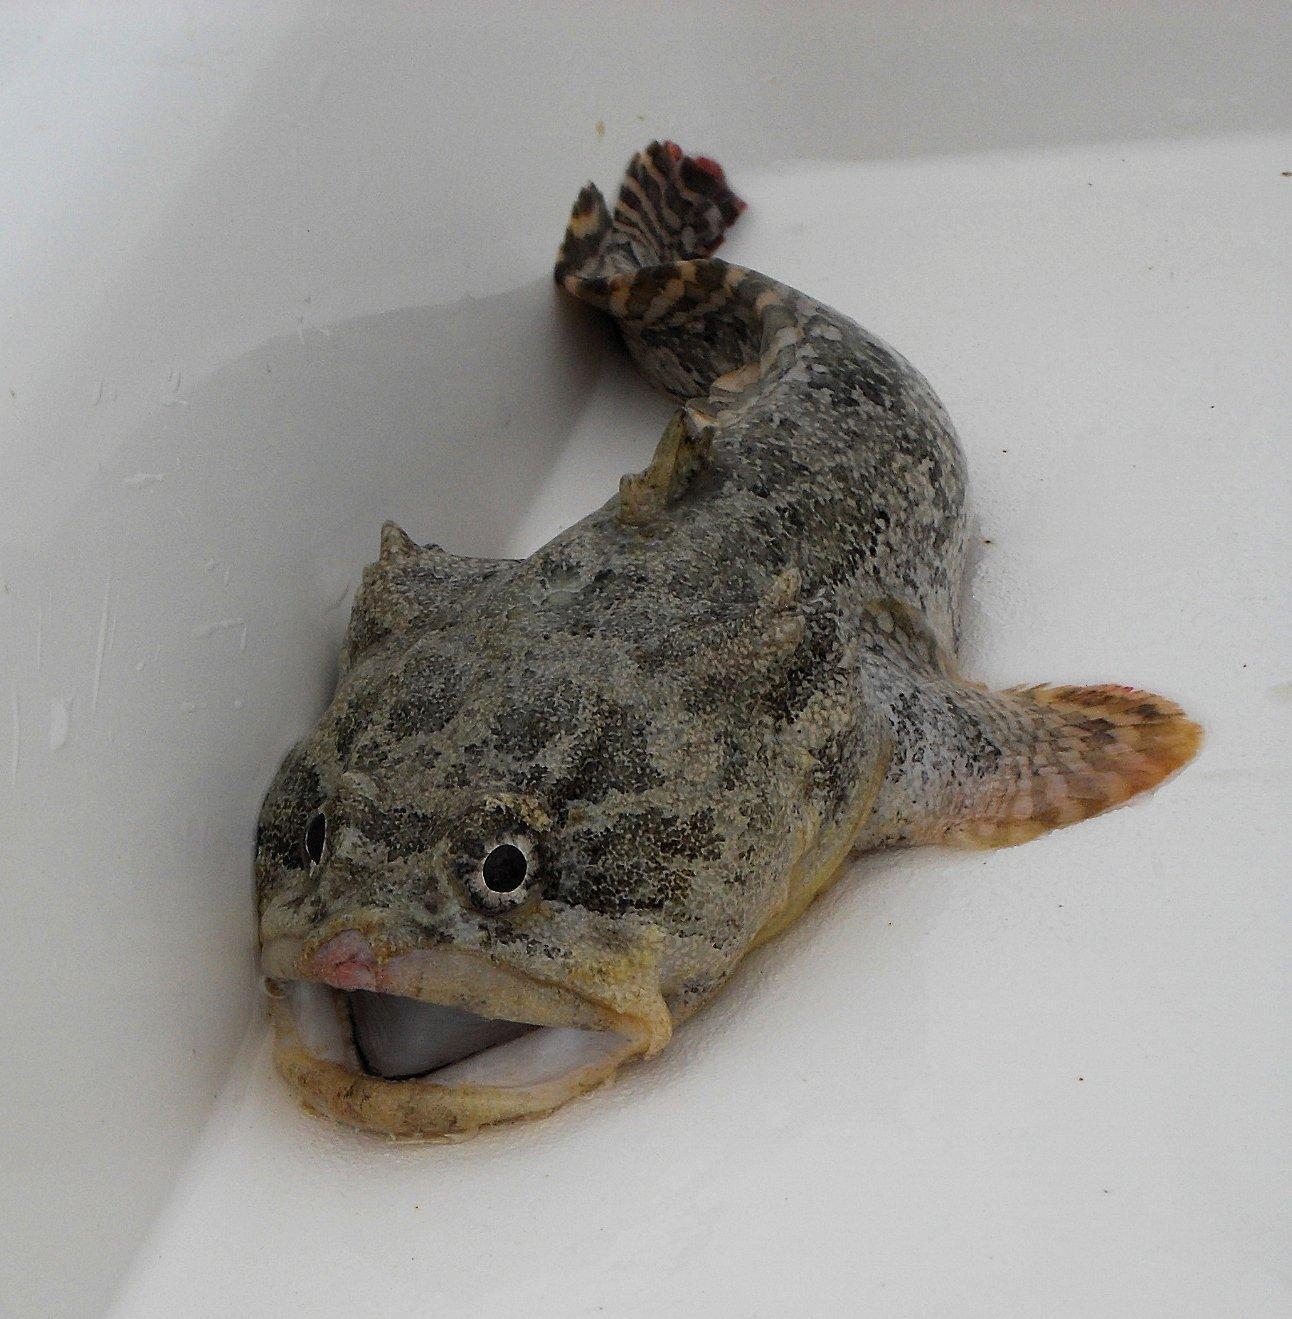 Infestation of poisonous toadfish concerns locals in Turkish